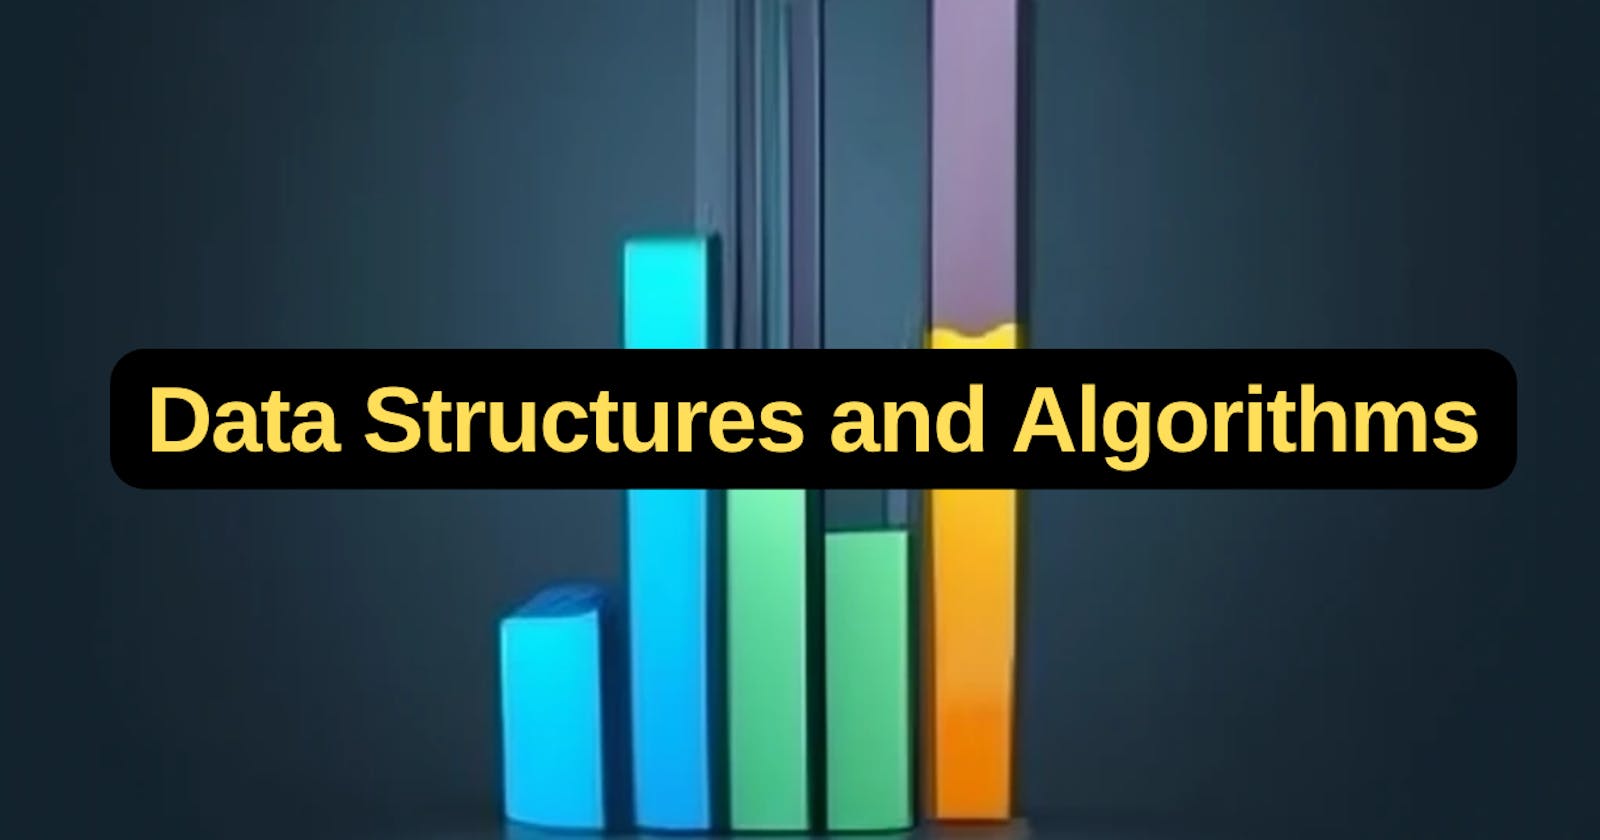 Data structures and algorithms